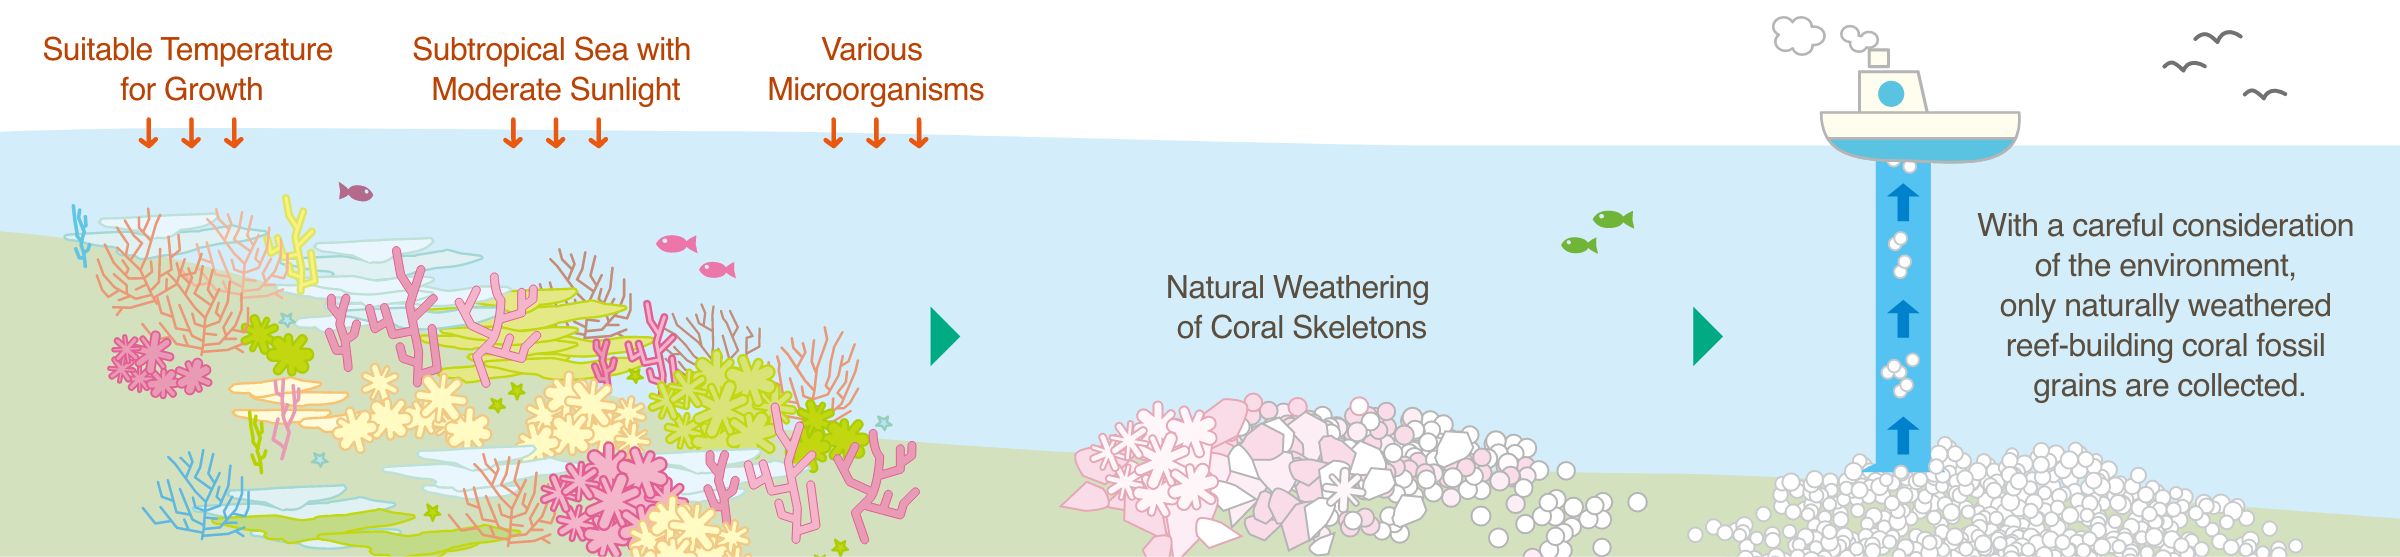 How Weathered Reef-Building Coral Grains are made